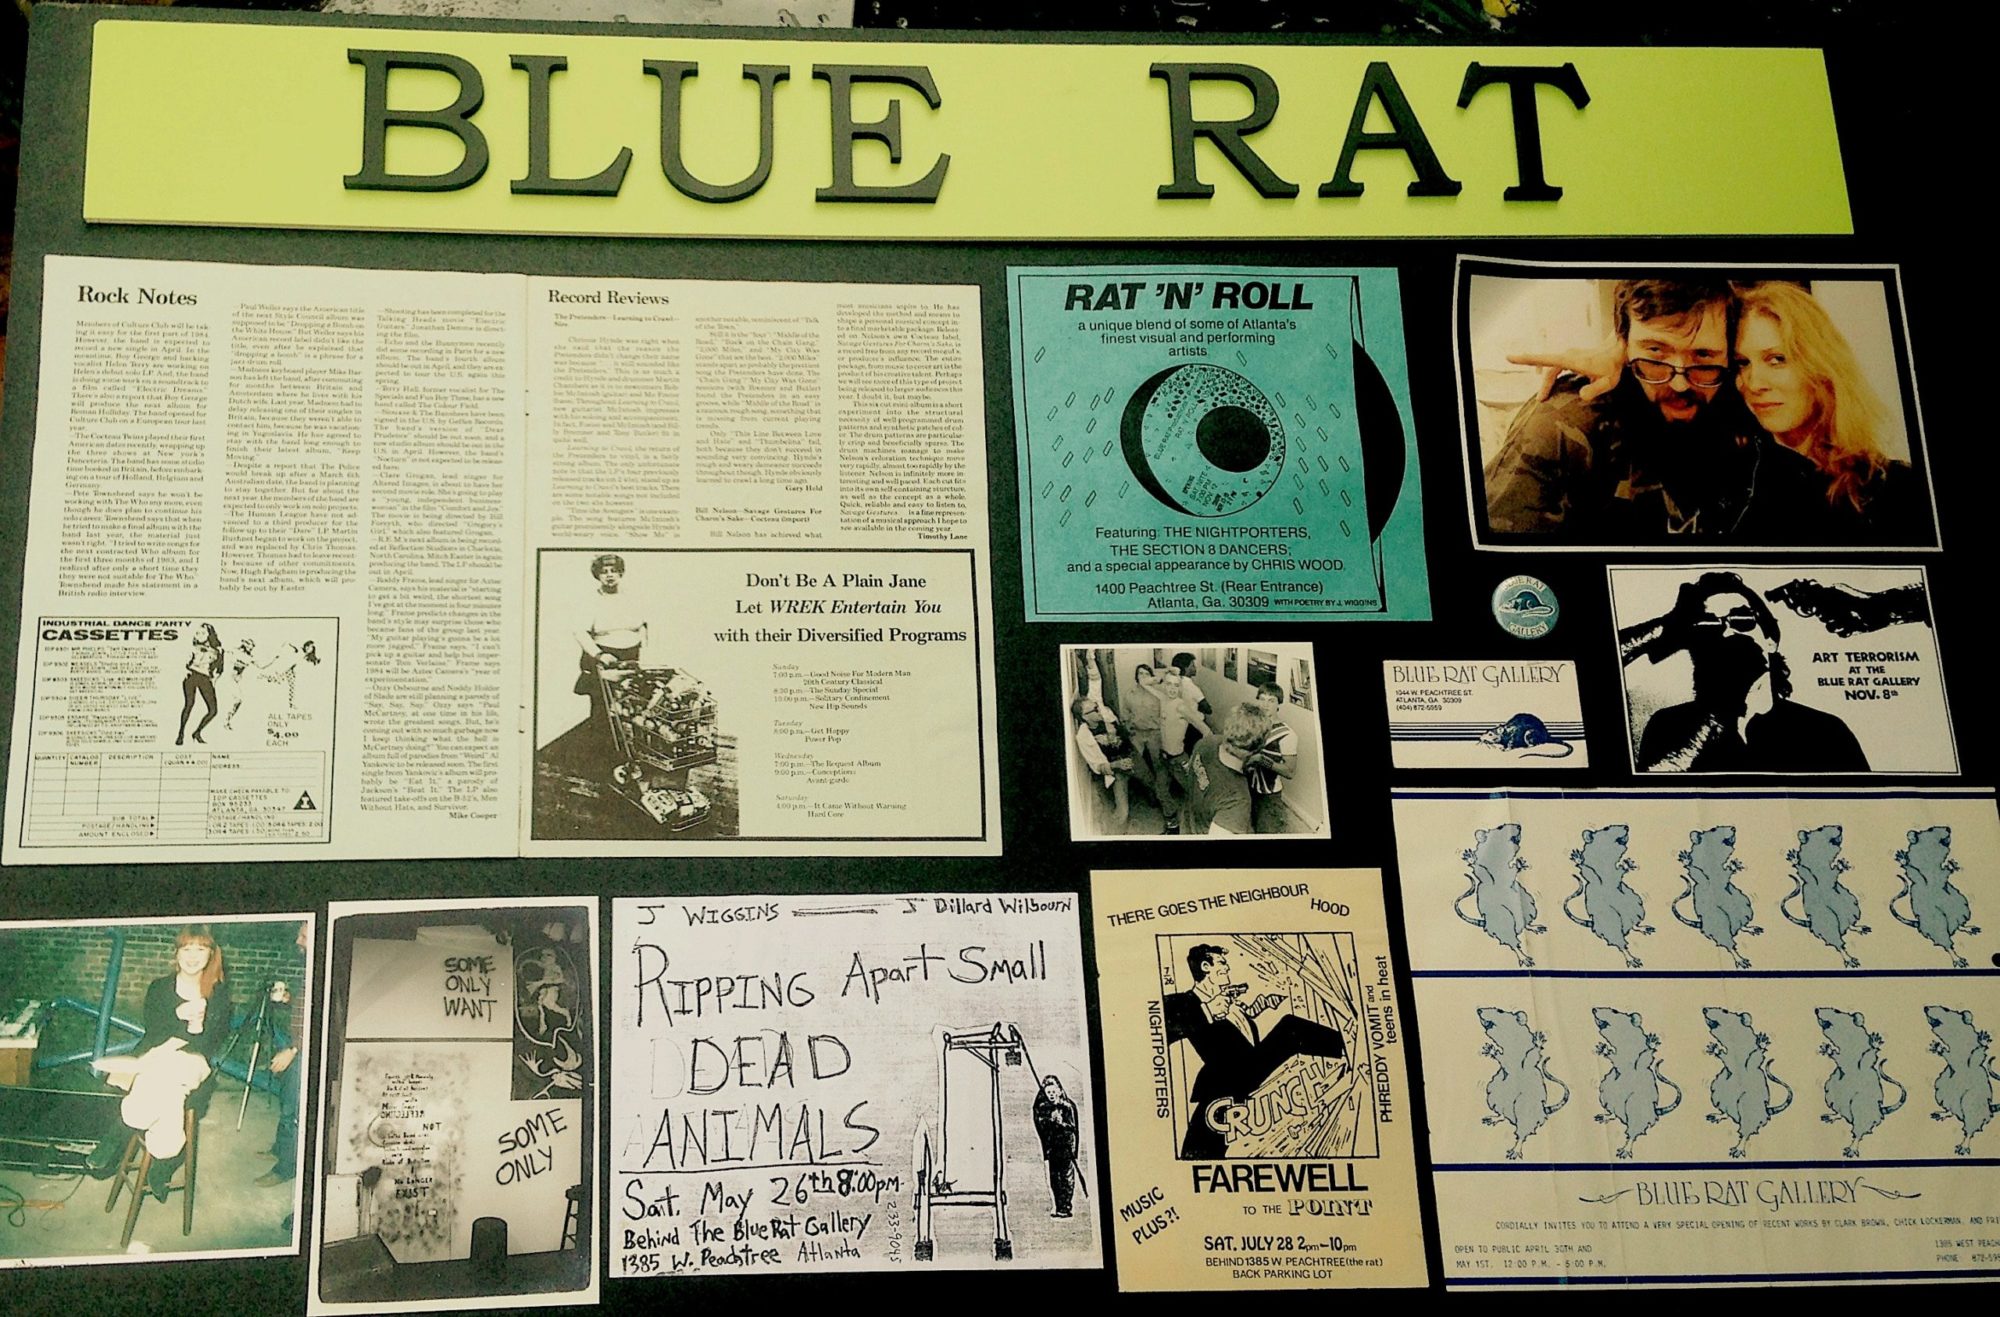 A photograph of a Blue Rat Poster, with images and documentation of various events.